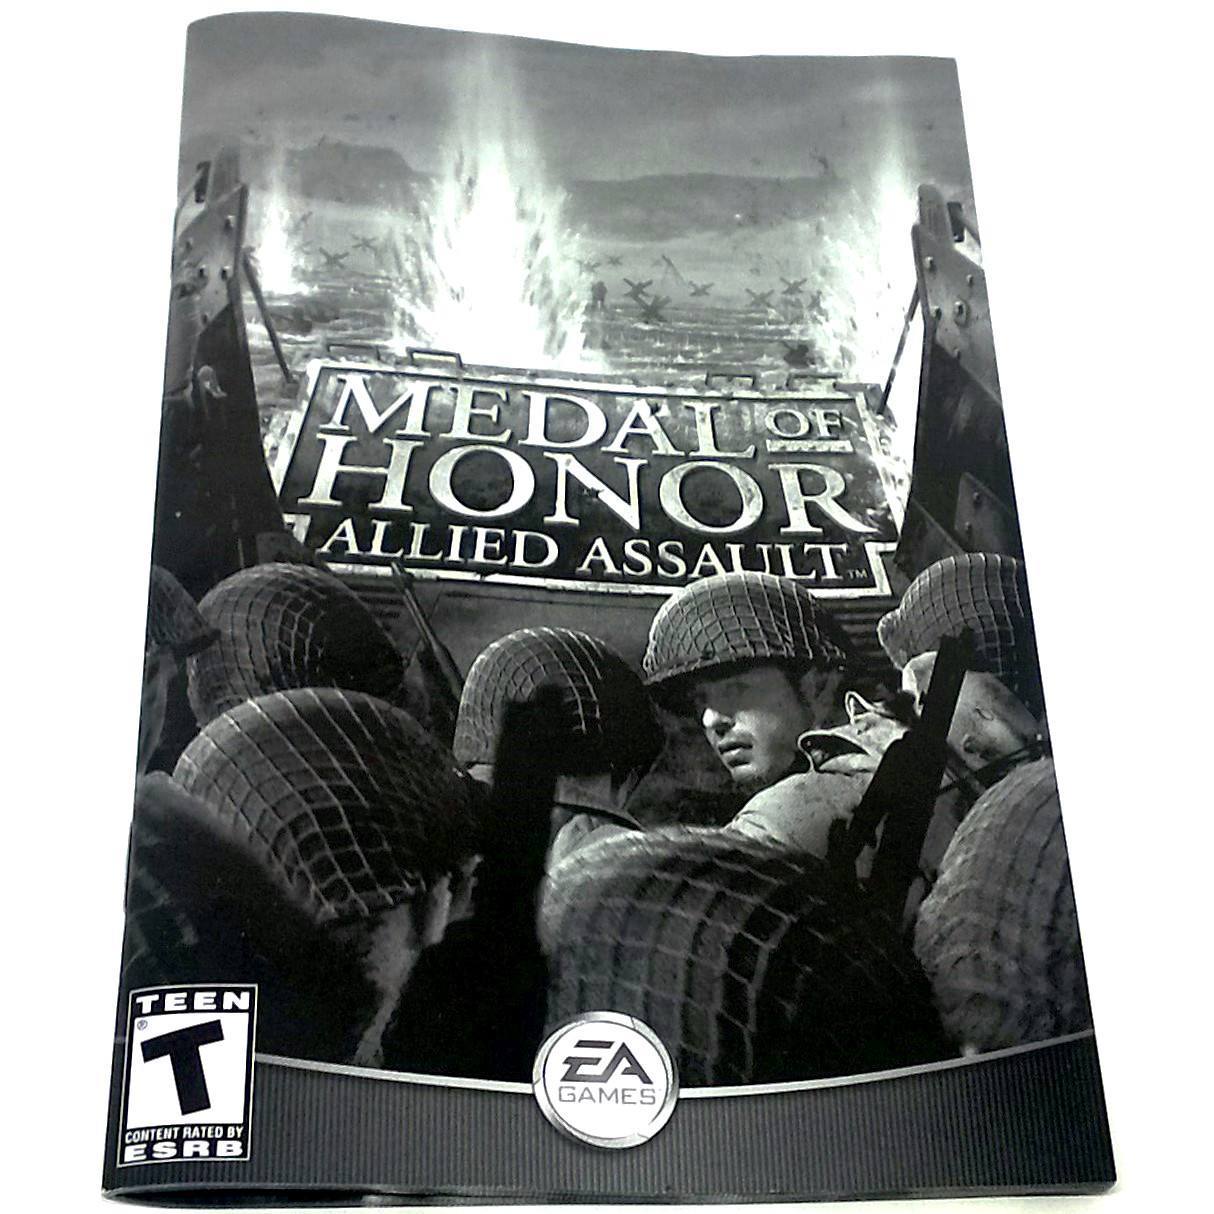 Medal of Honor: Allied Assault for PC CD-ROM - Front of manual